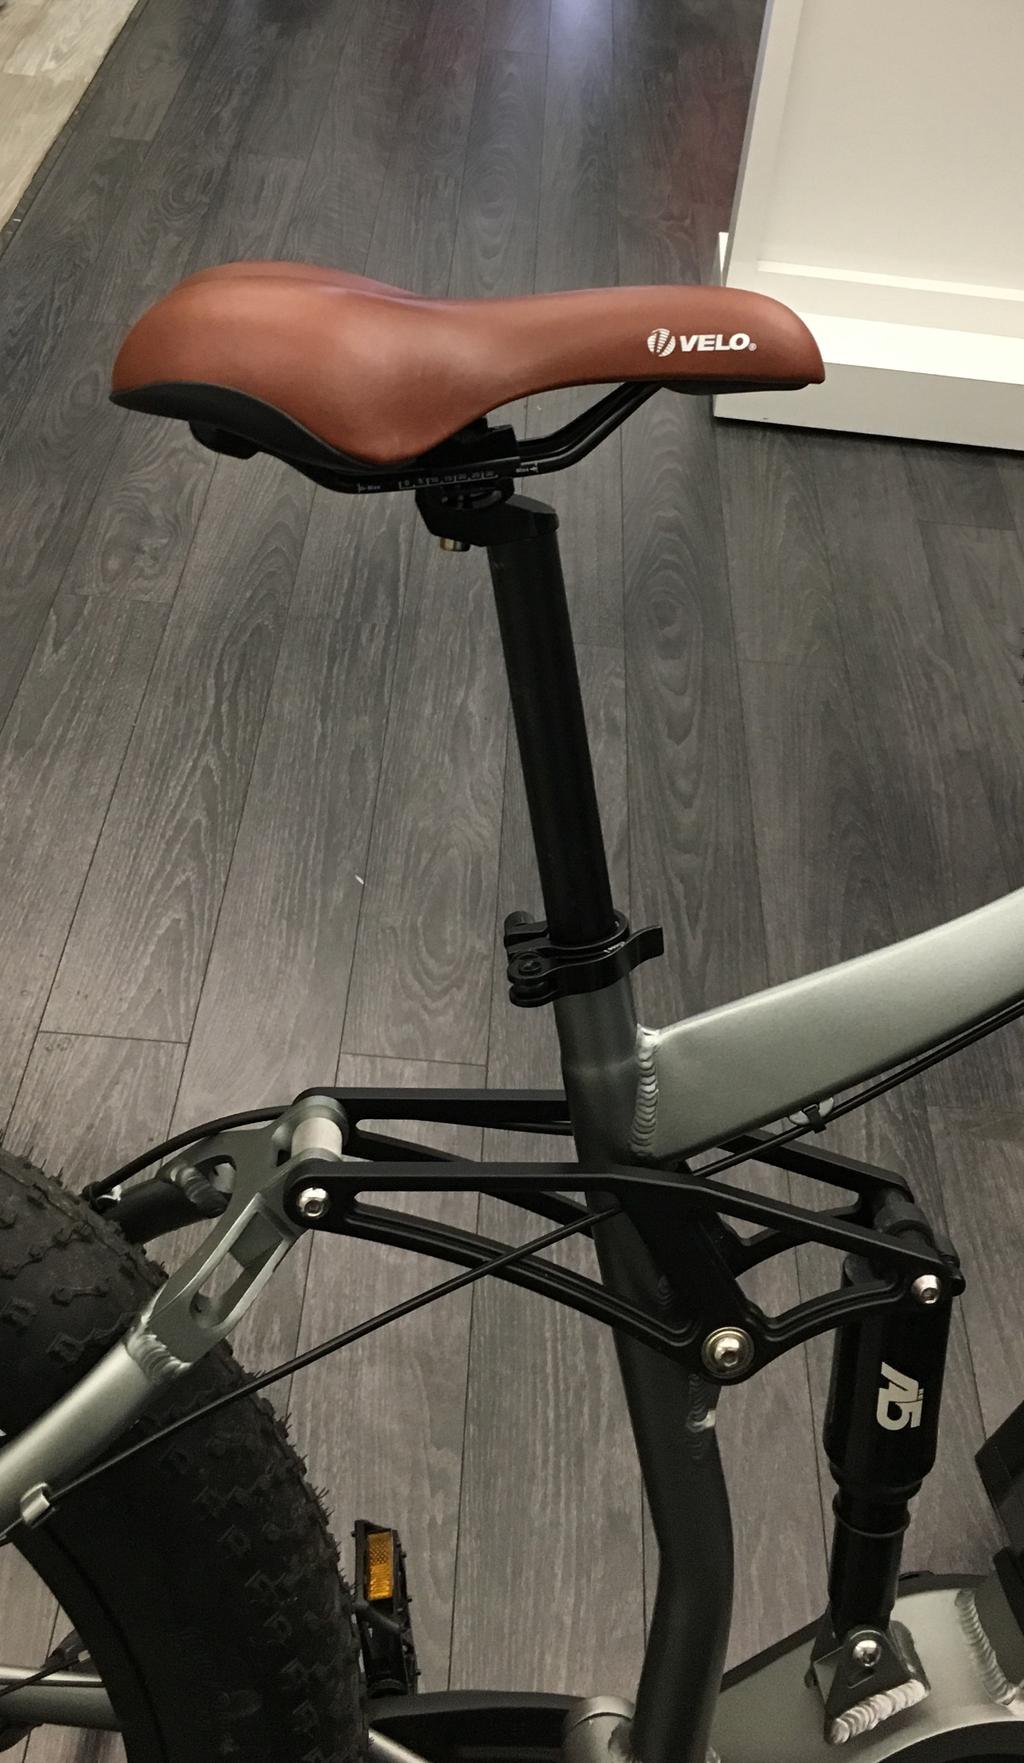 If the safety line on the seat tube is visible (as seen in the picture to the left), then lower the seat until the